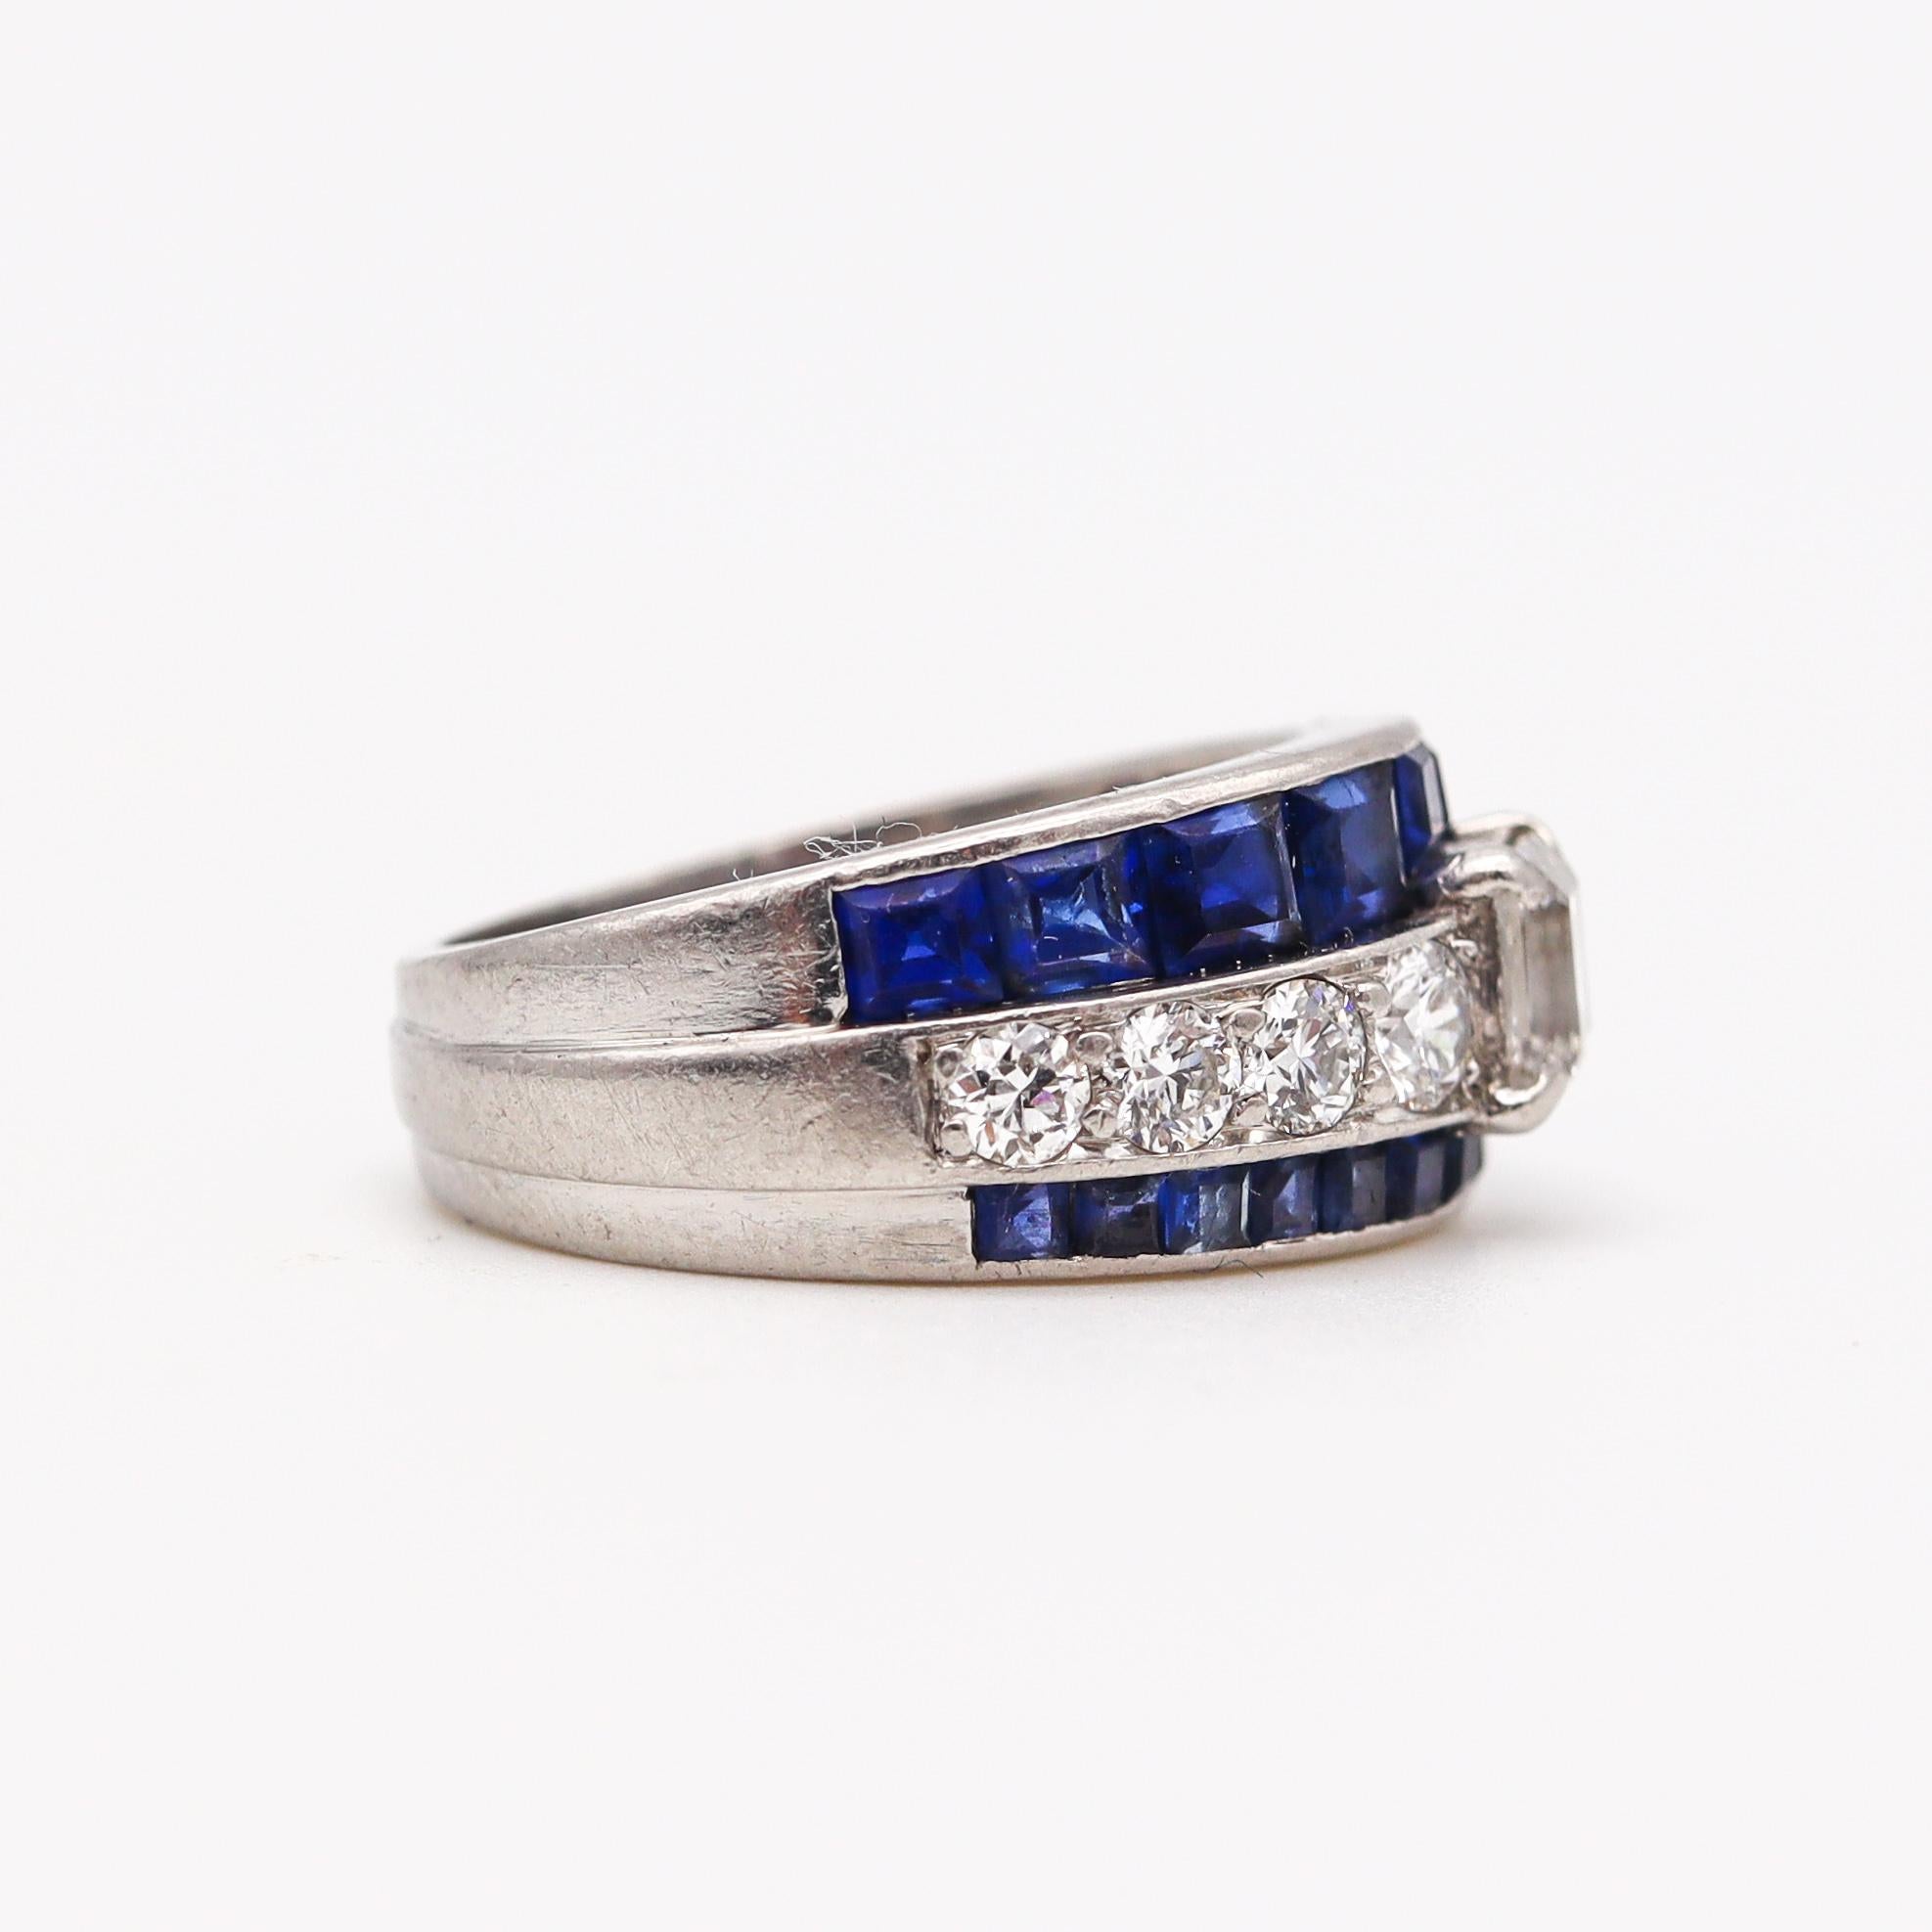 French Cut Raymond C Yard 1940 Art Deco Ring in Platinum with 3.12 Cts Diamonds & Sapphires